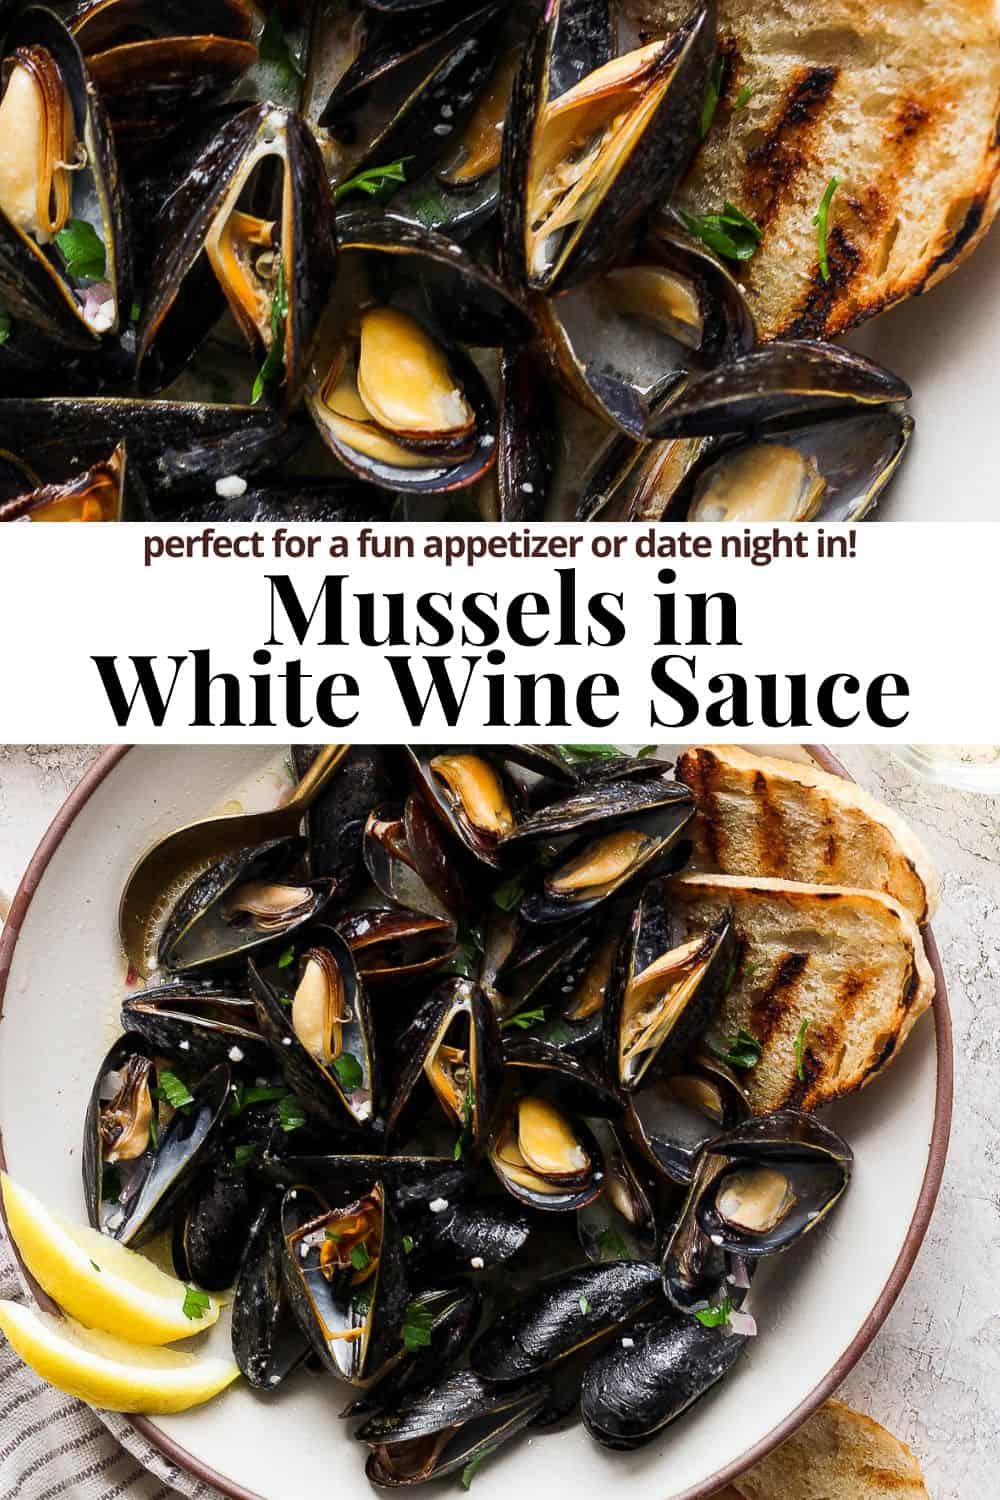 Pinterest image for mussels in white wine sauce.